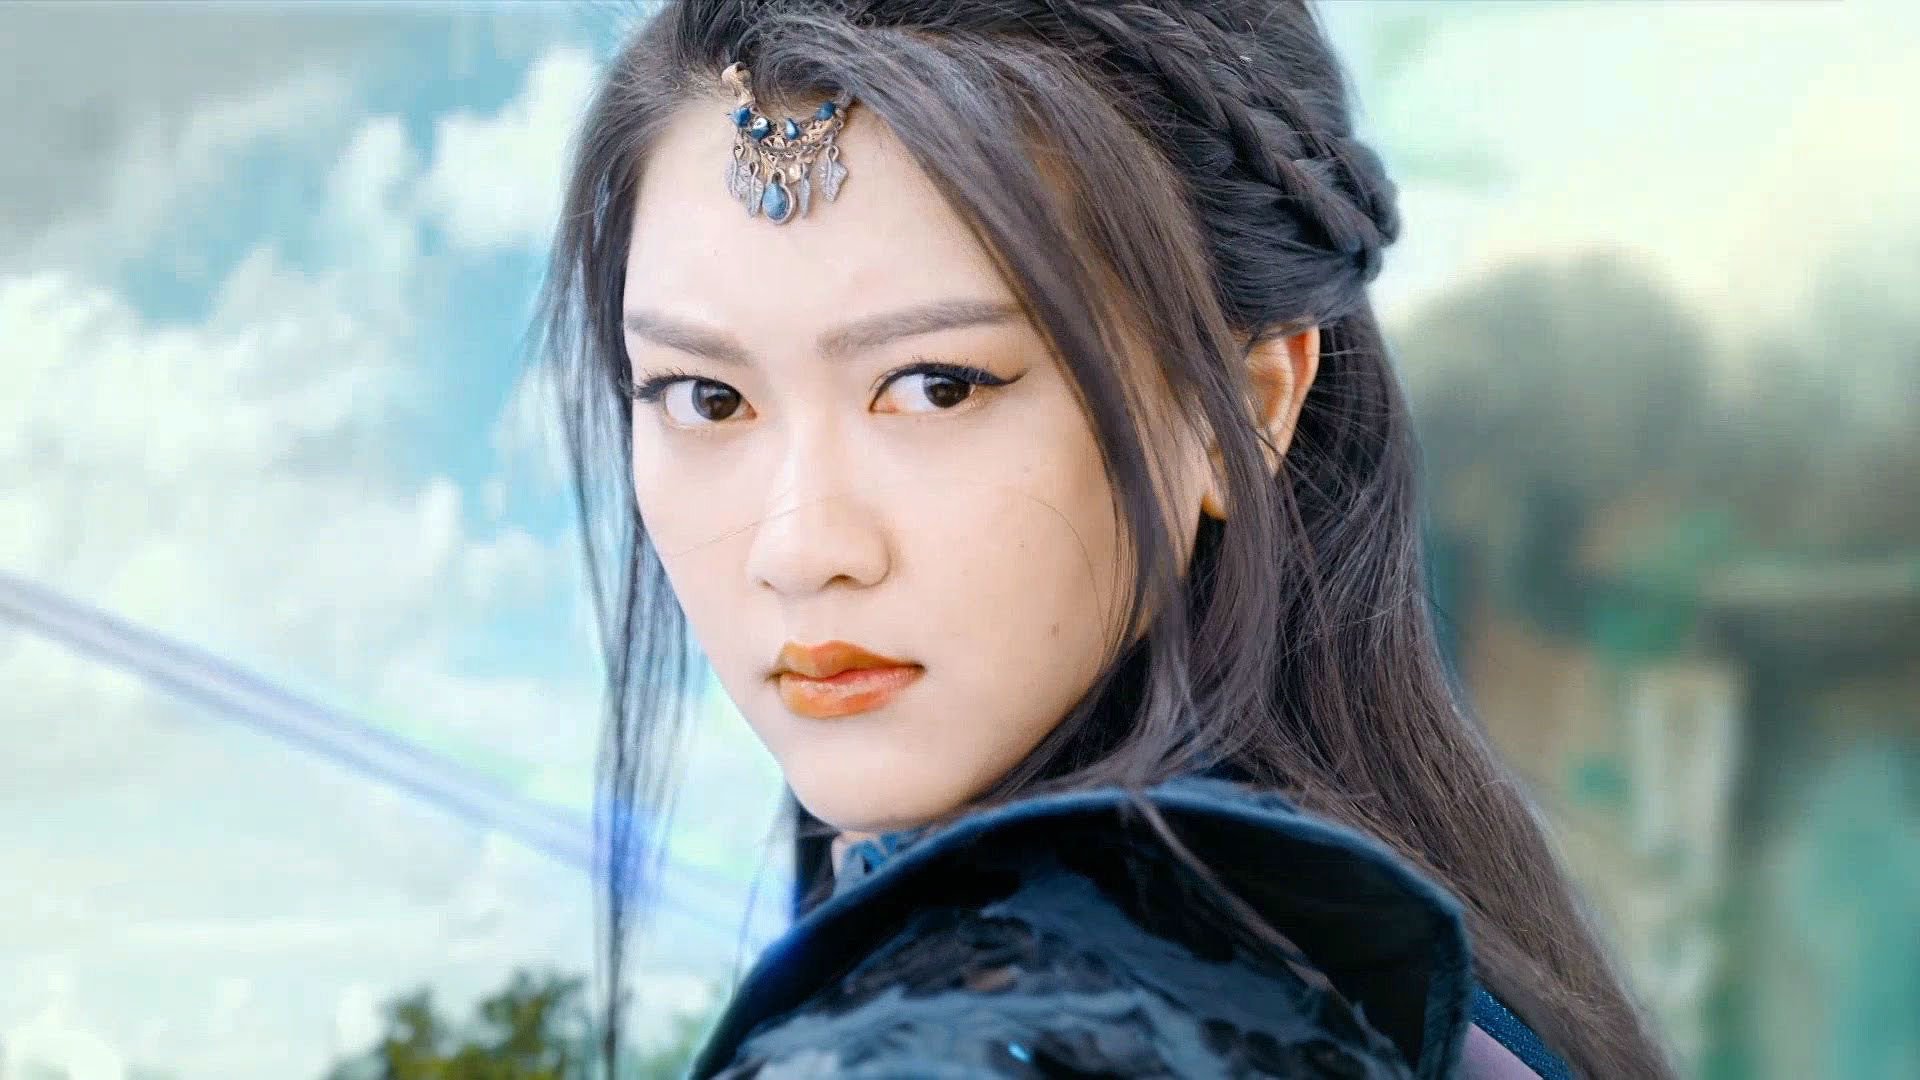 Ice Fantasy Huancheng Television Series Asian Oriental Action